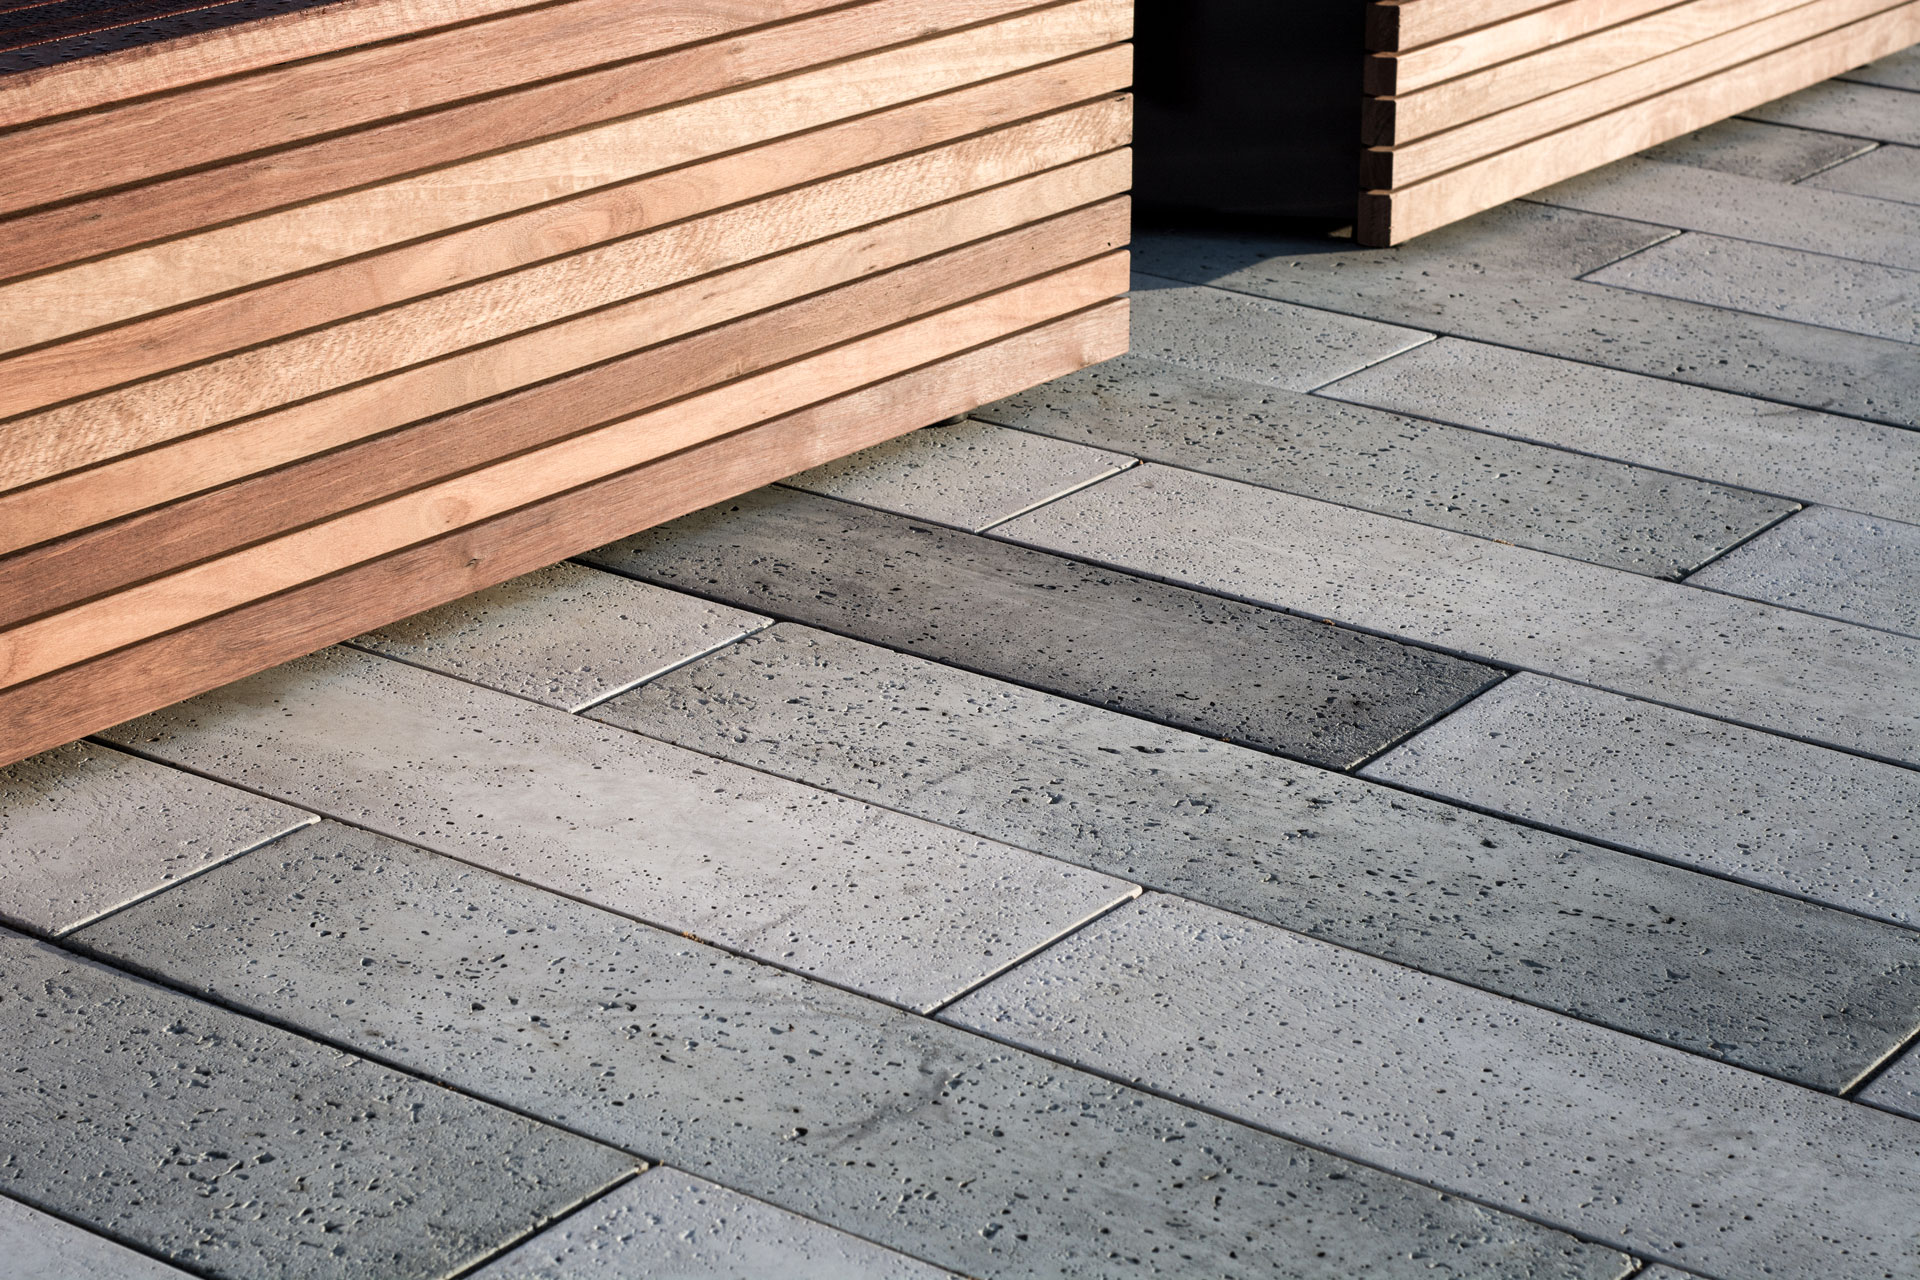 Rectangle pavers in multiple paver colors mimic the bench design of the park